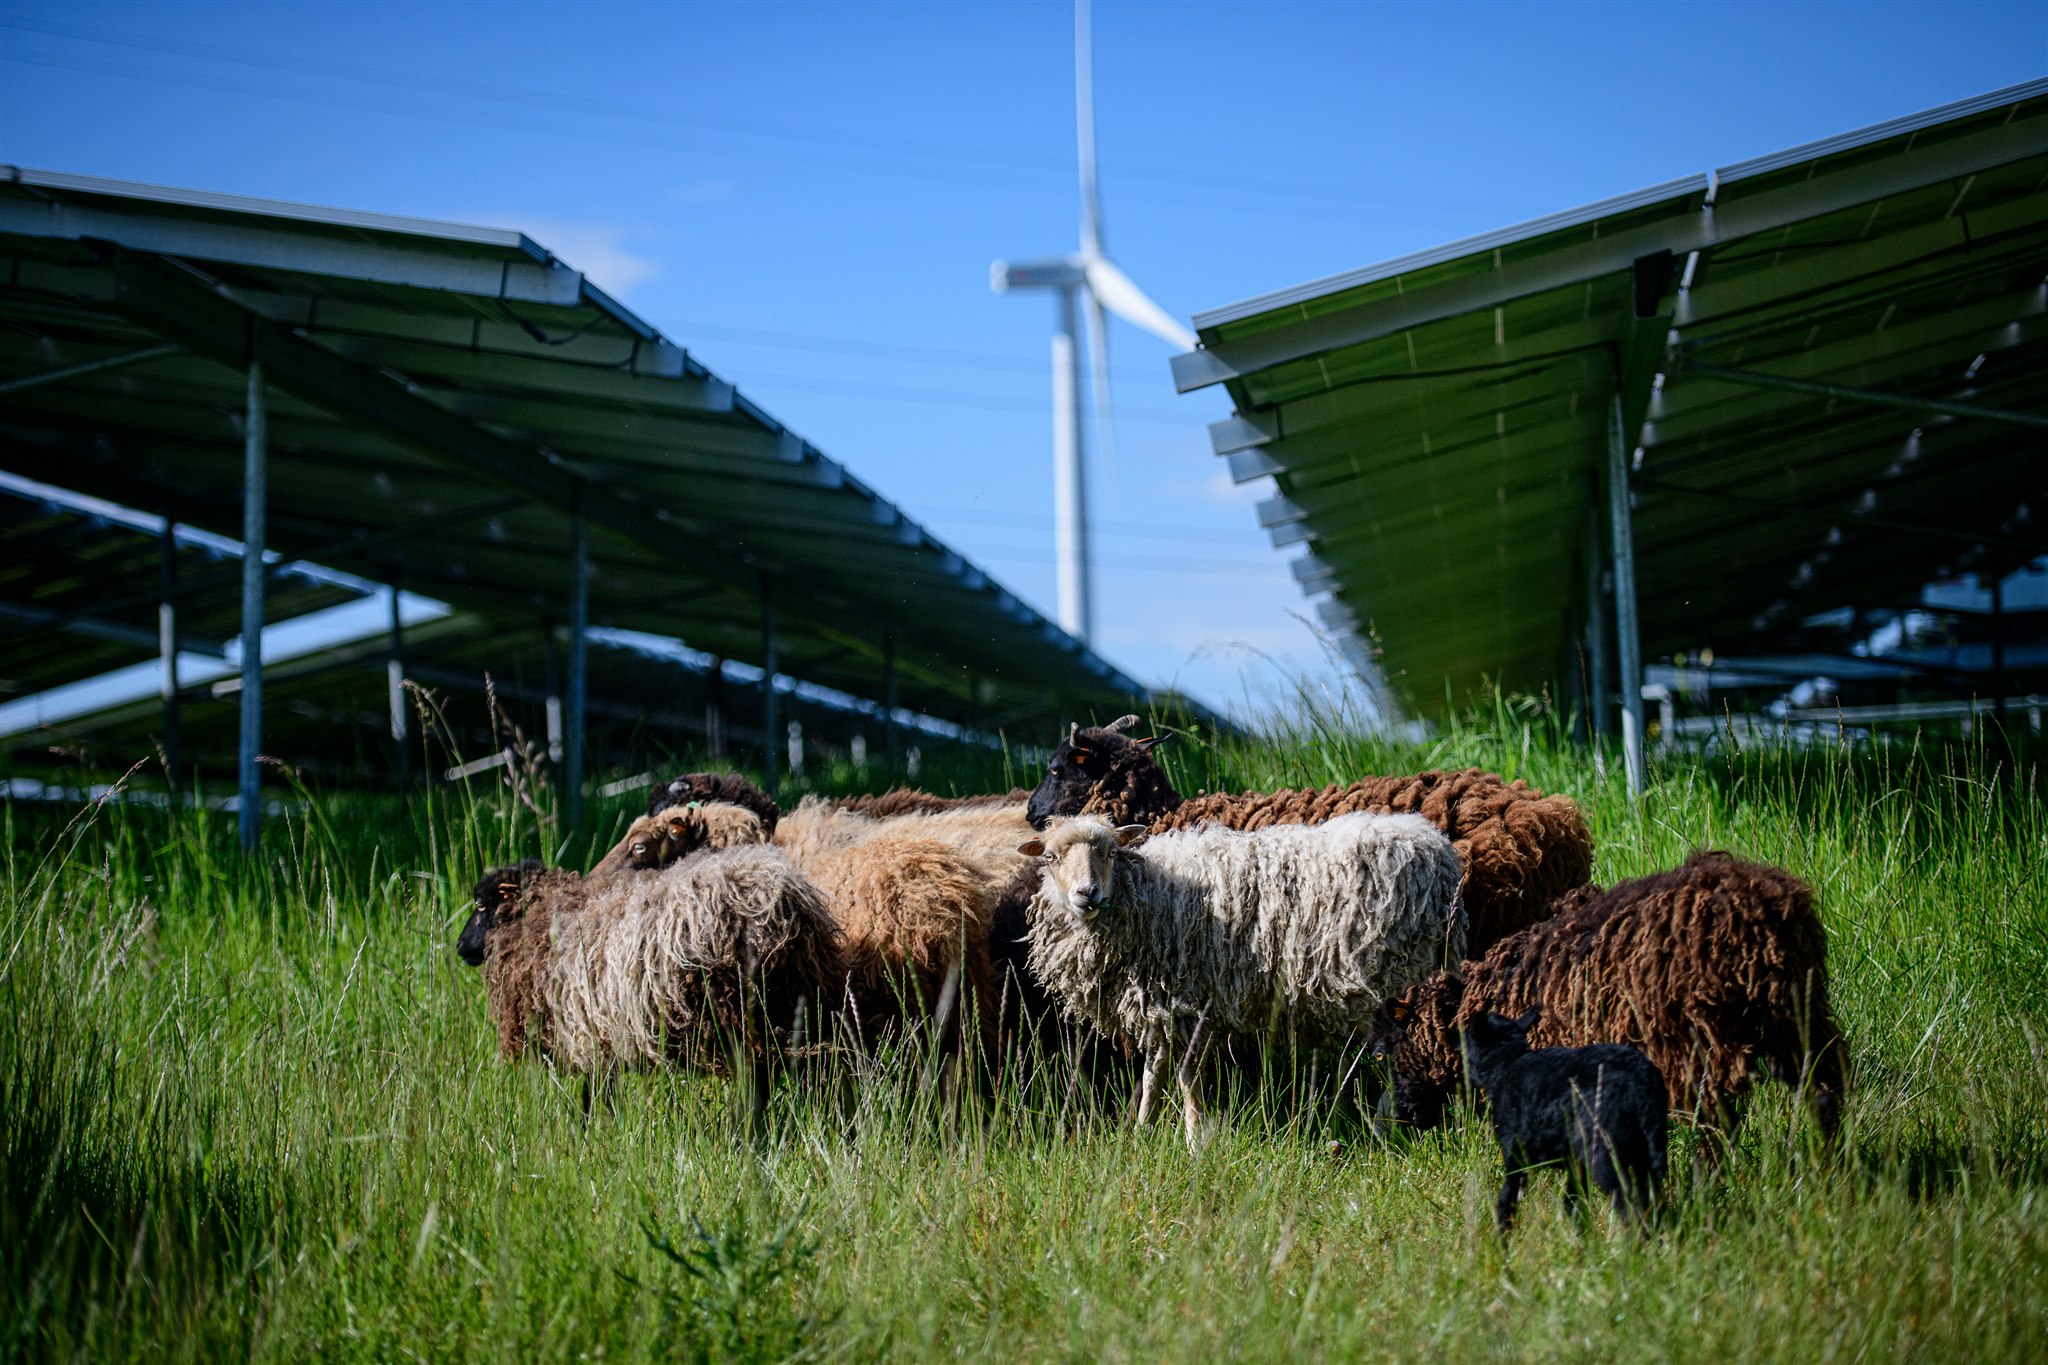 Sheep grazing in front of solar panels